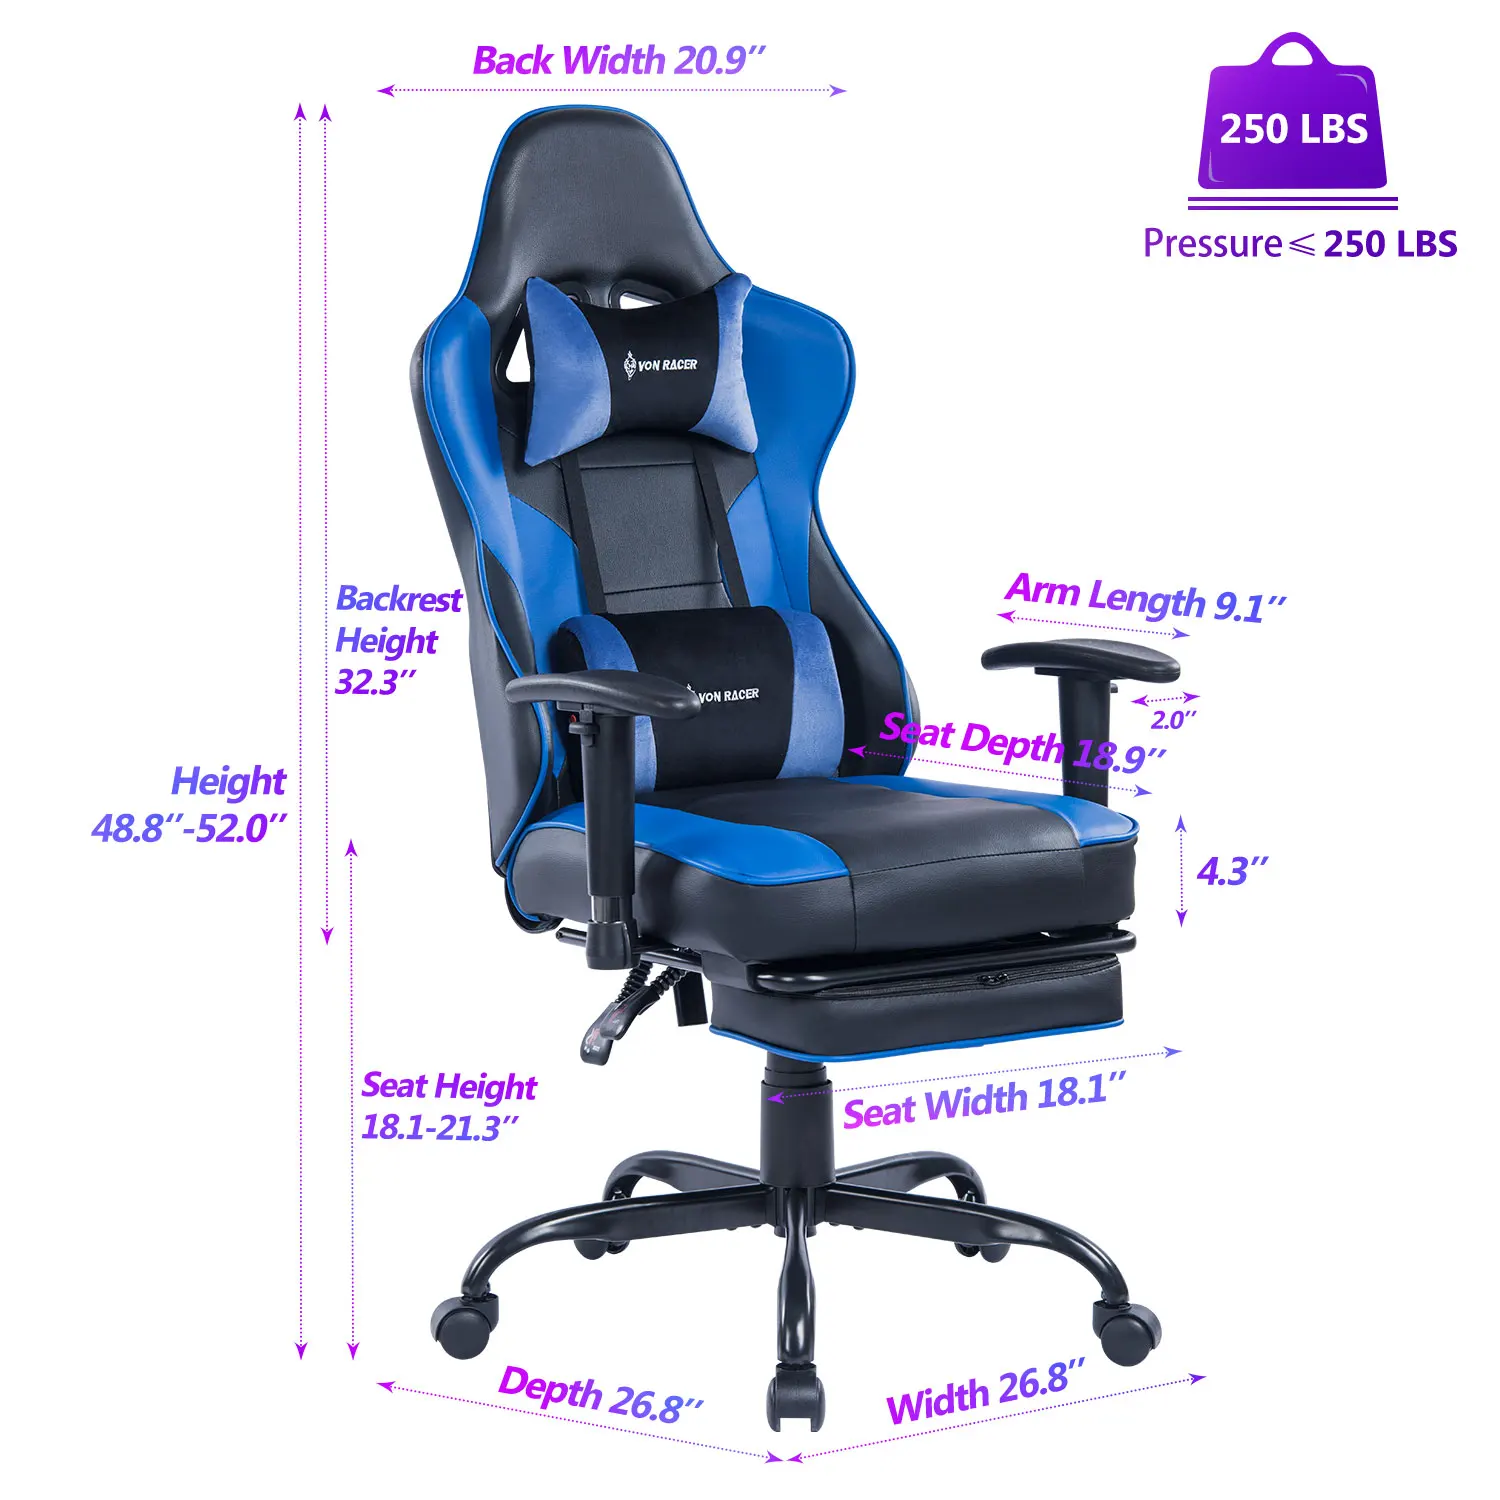 Amazon Von Racer Black Pu Leather Racing Gamming Chair With Footrest Chair Computer Buy Racing Chair Gaming Chair Gaming Chair With Footrest Product On Alibaba Com